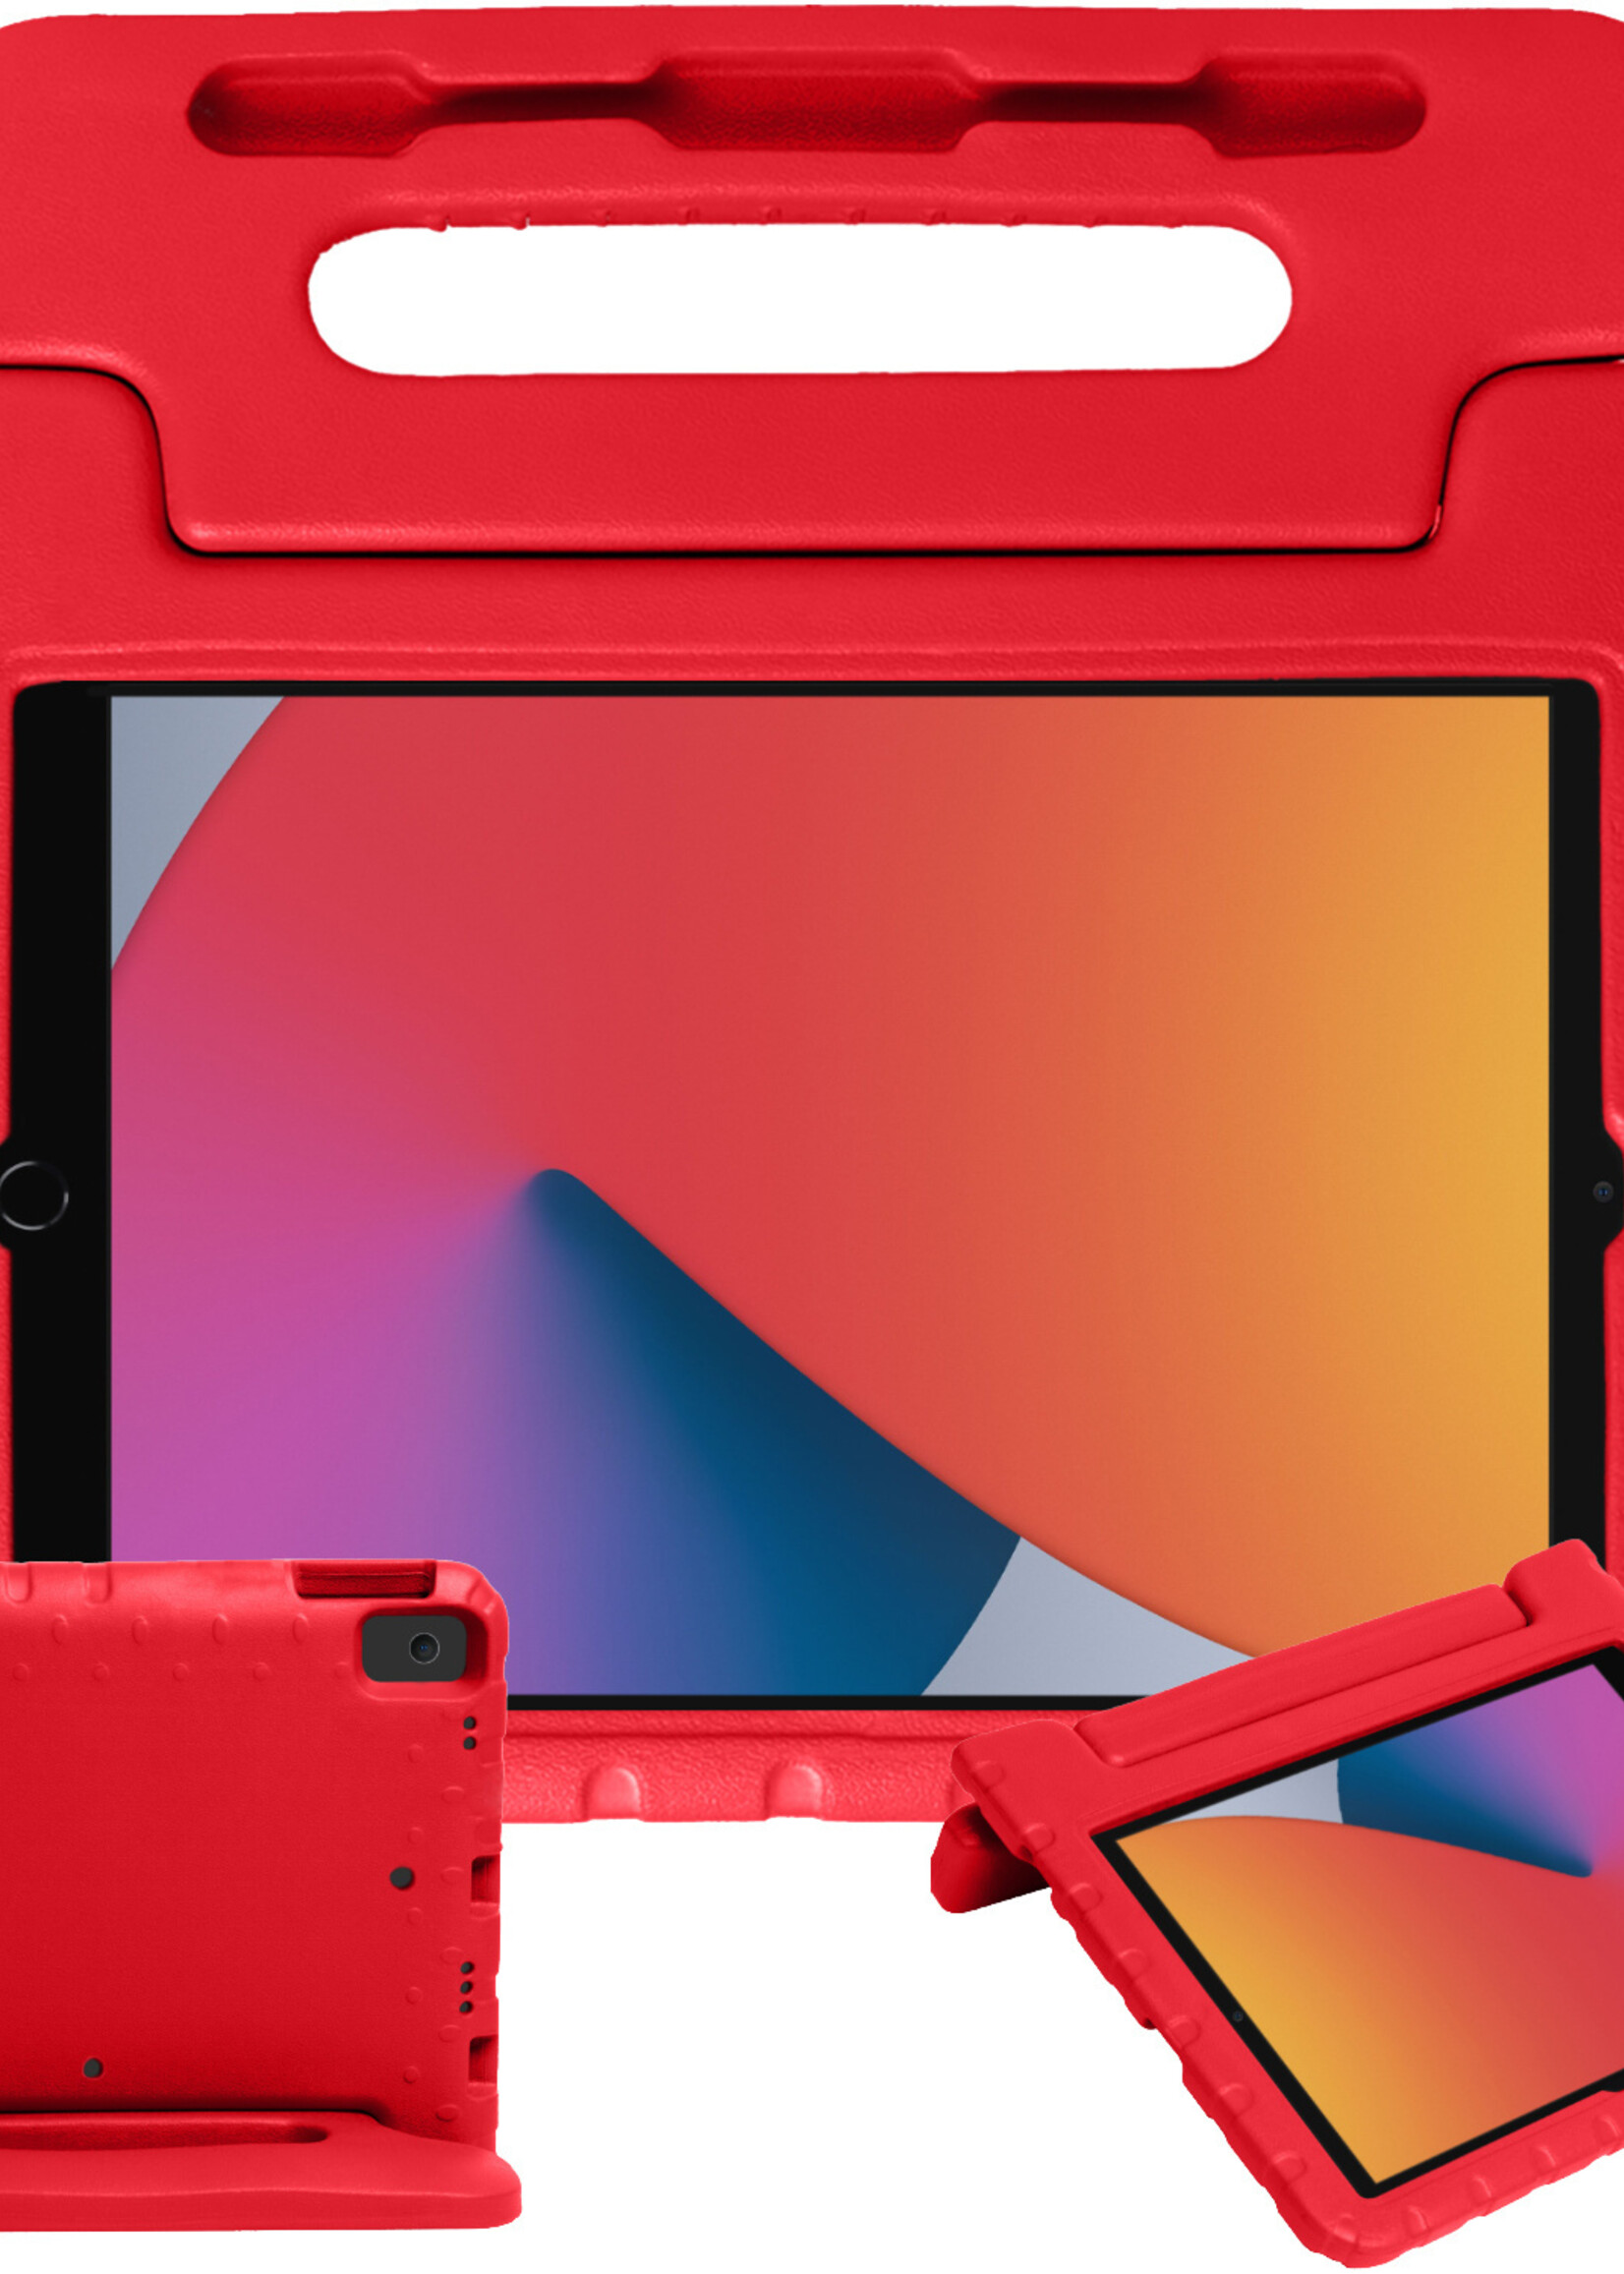 BTH iPad 10.2 2021 Hoes Kinder Hoesje Kids Case Cover Kids Proof - iPad 10.2 2021 Hoesje Kinder Hoes - Rood